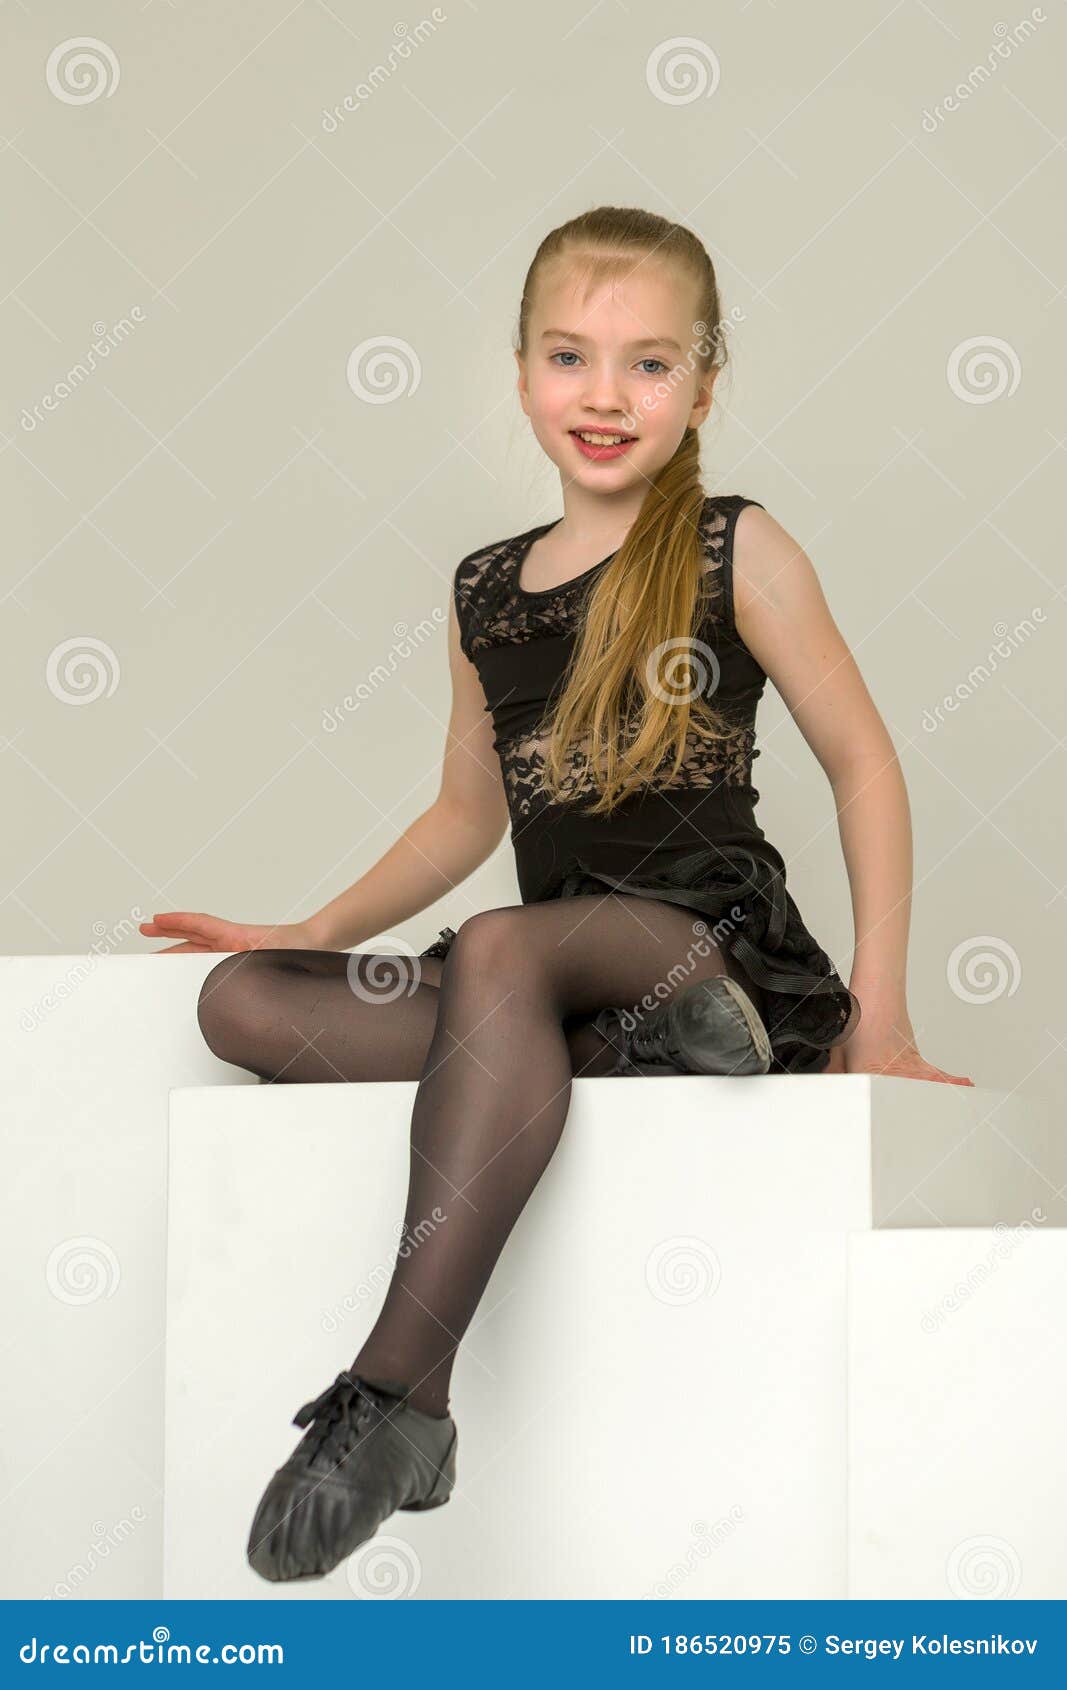 ls models preteen child little girl Young girl with long hair stock image. Image of health - 1206799